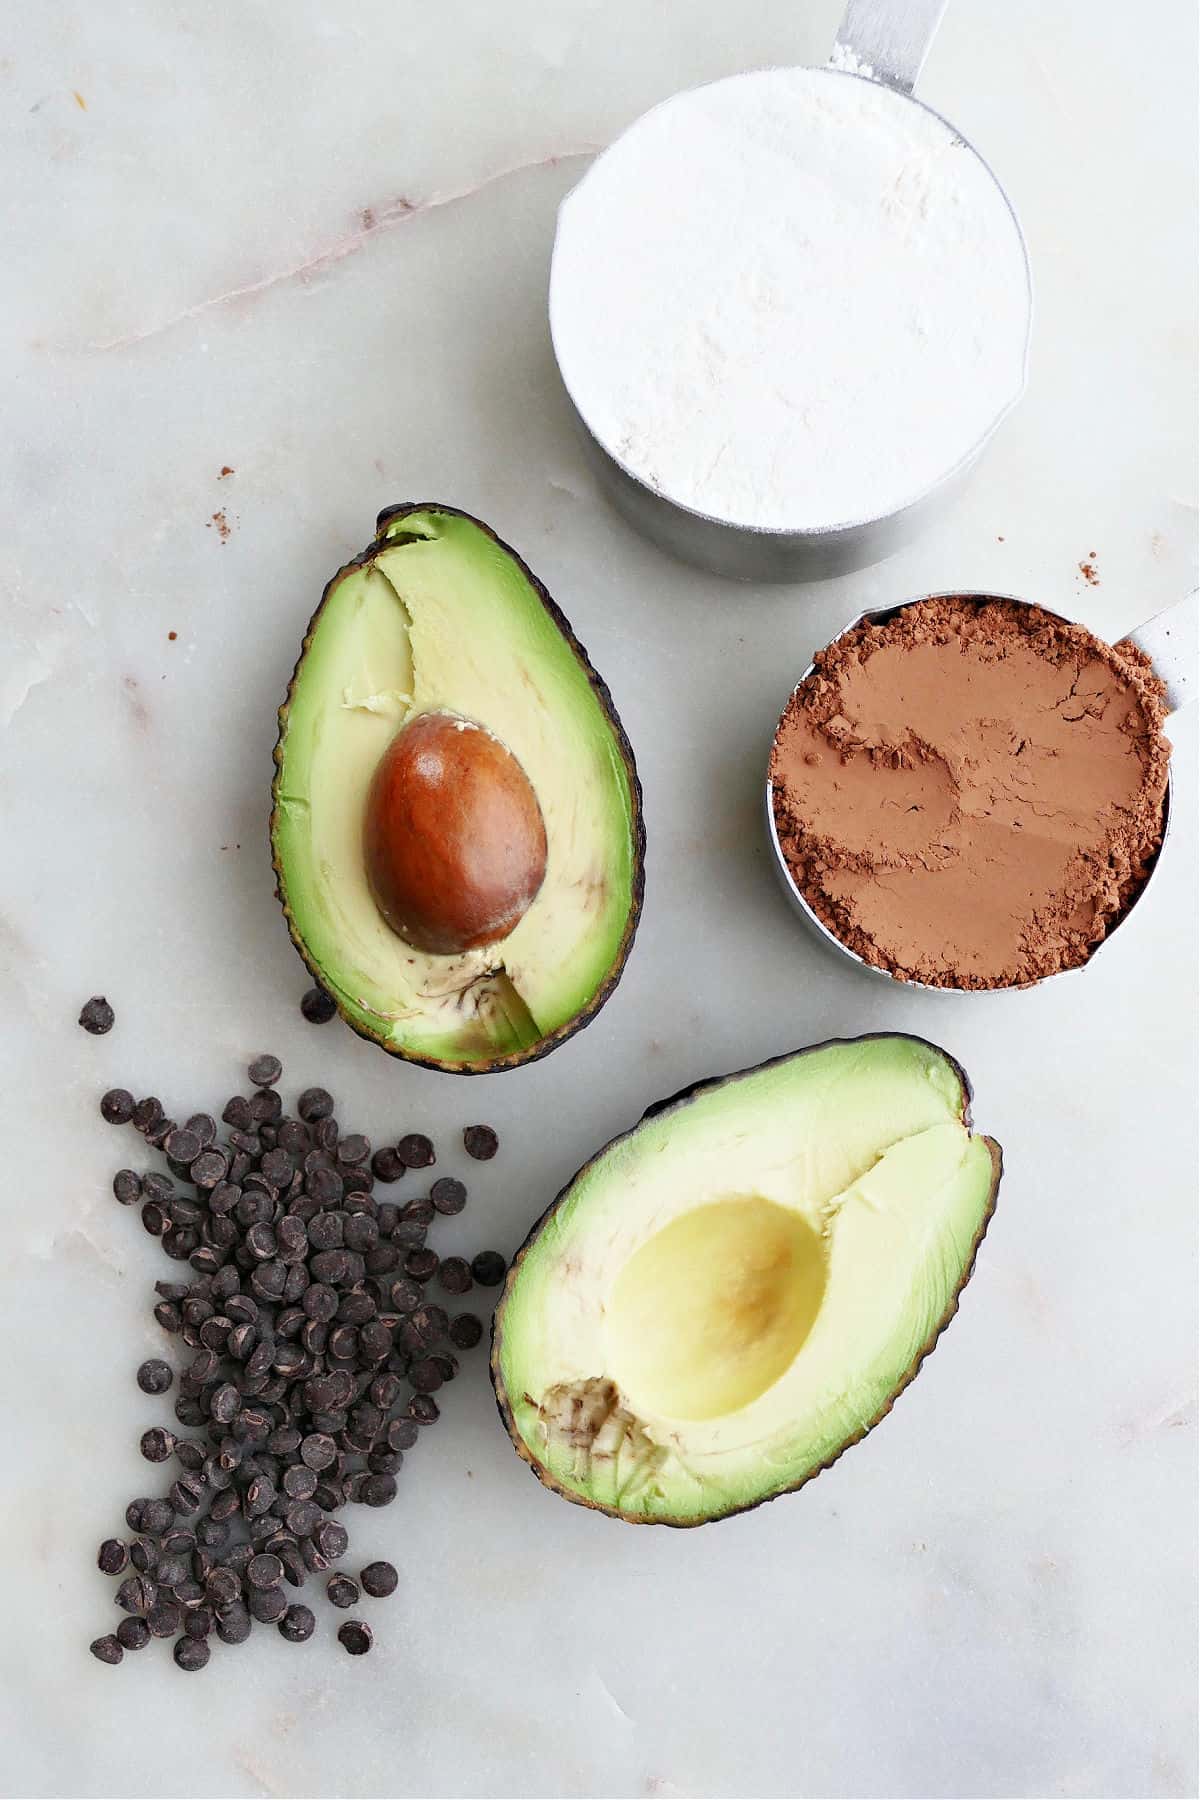 two avocado halves, chocolate chips, flour, and cocoa powder next to each other on a counter